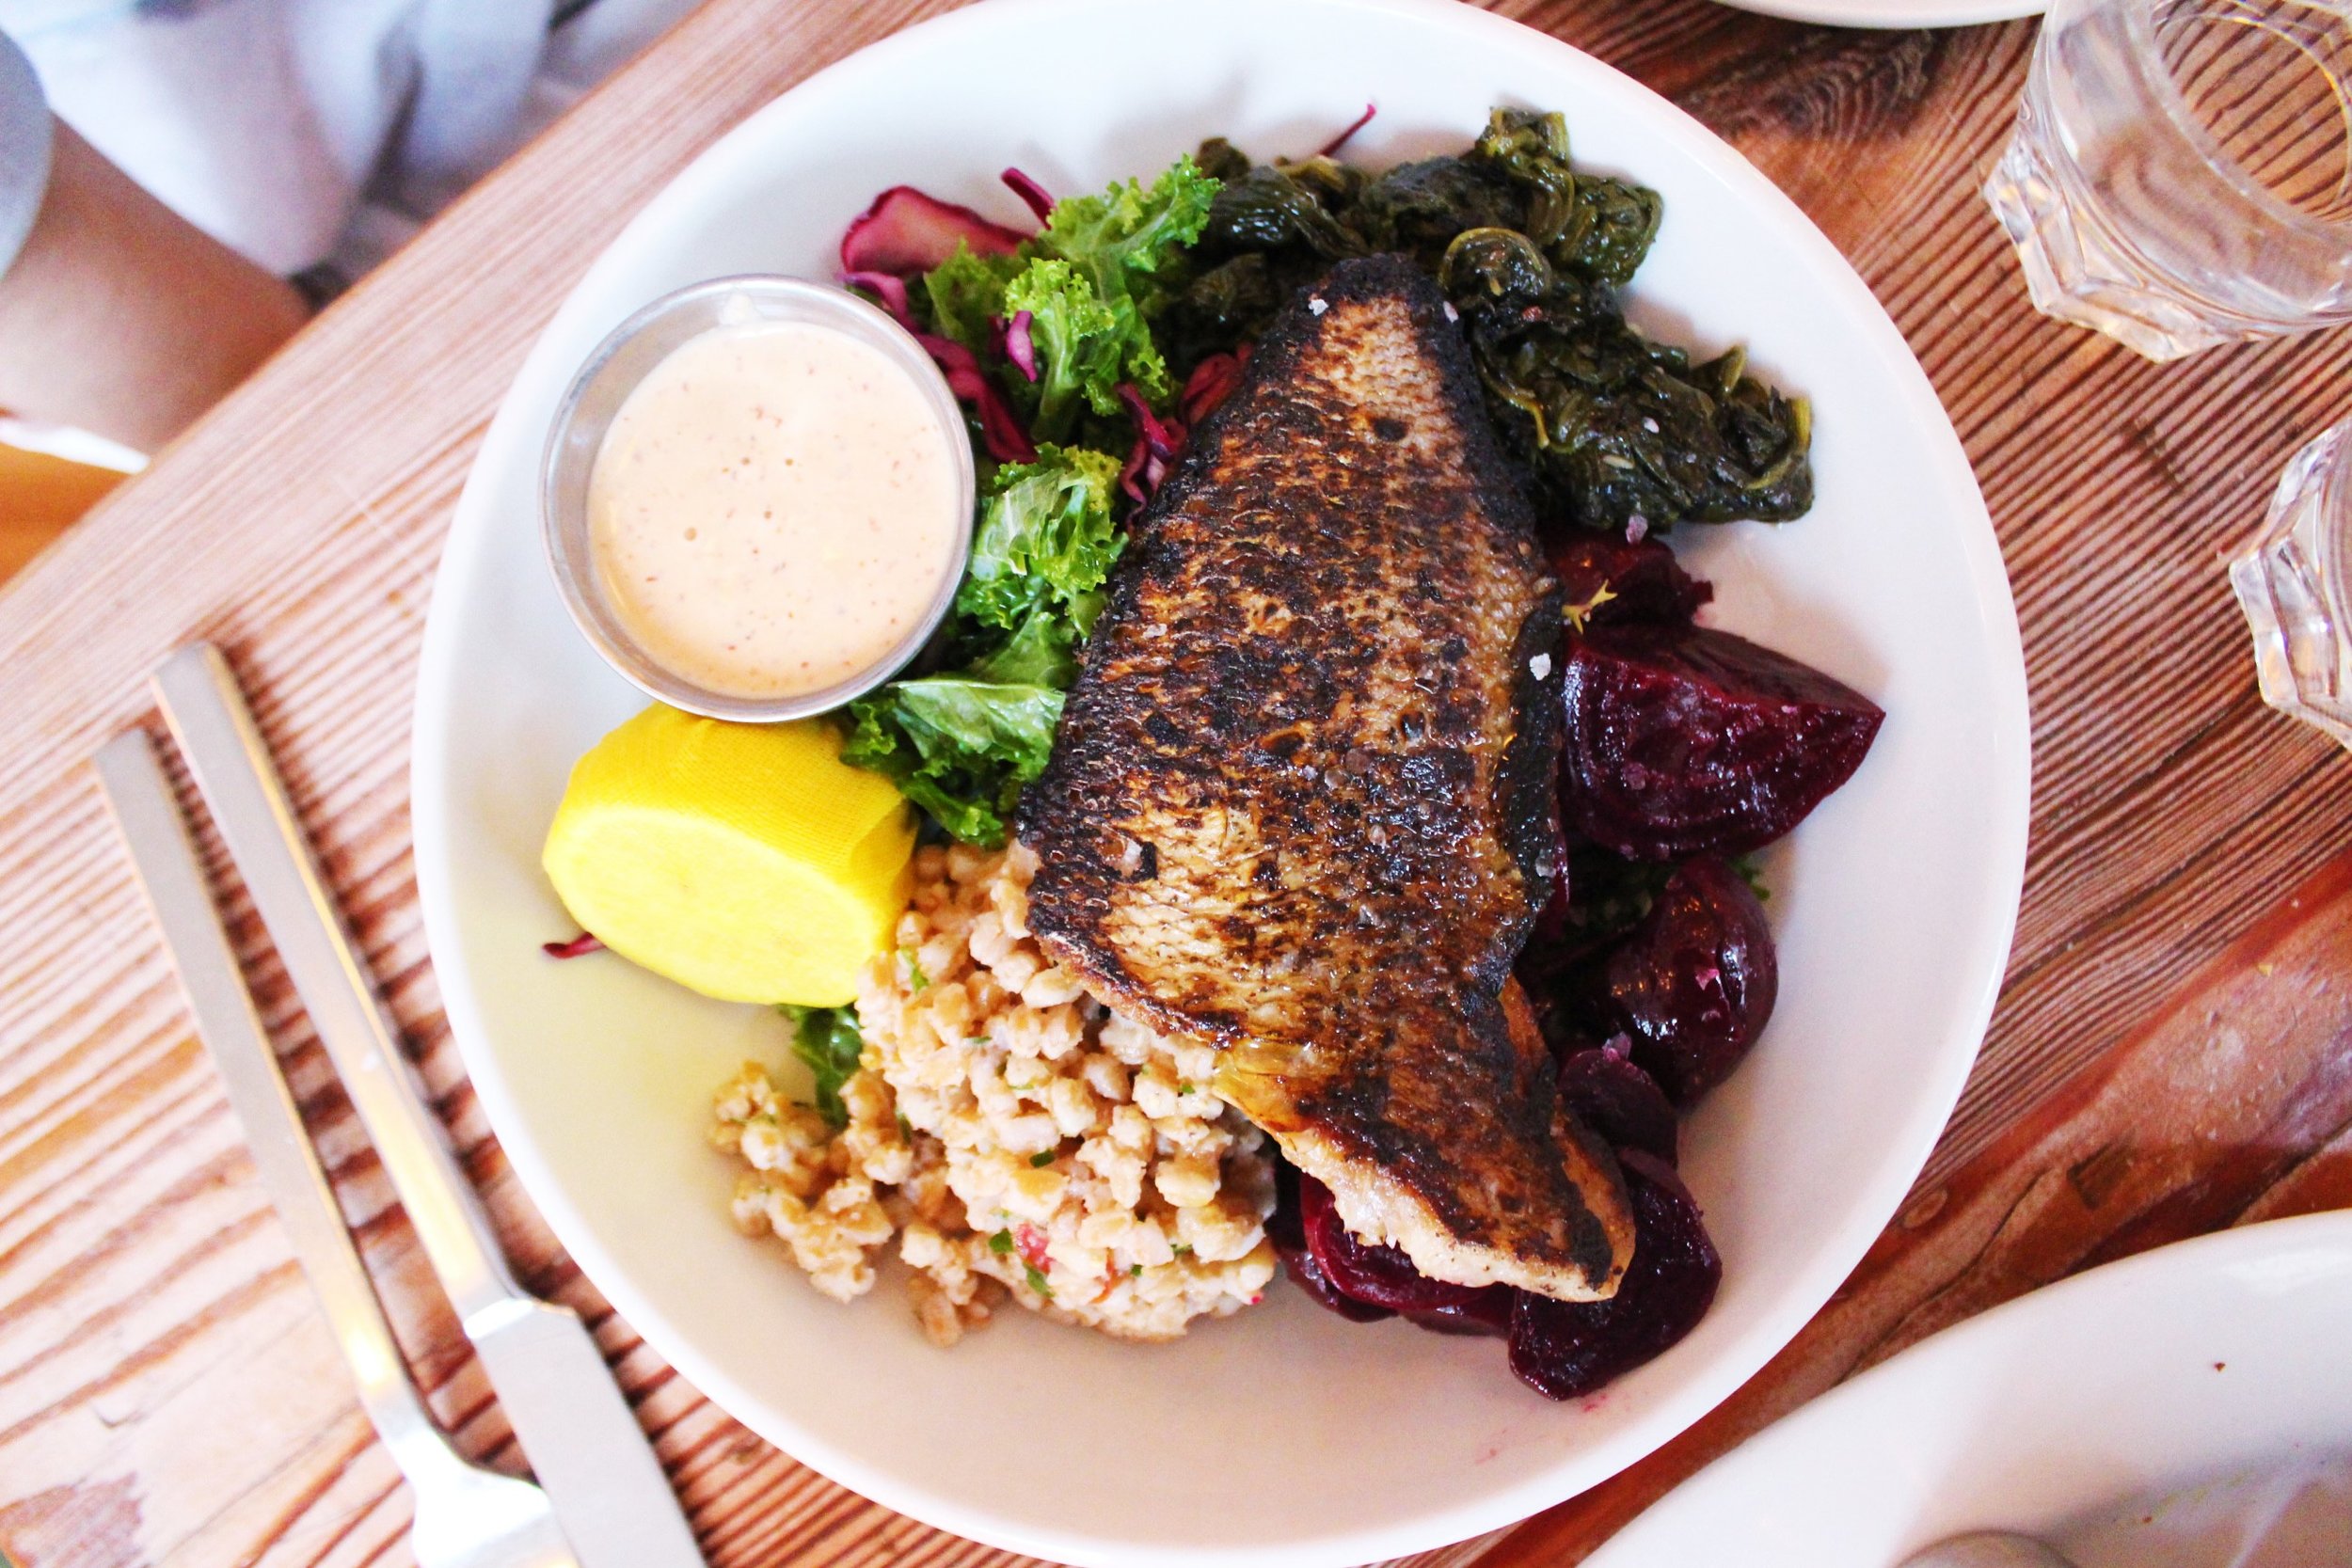 Porgy with Harissa Cashew Sauce with three sides (Sauteed Spinach with Garlic, Farro with Olives &amp; Cherry Tomatoes, Roasted &amp; Pickled Beets) 